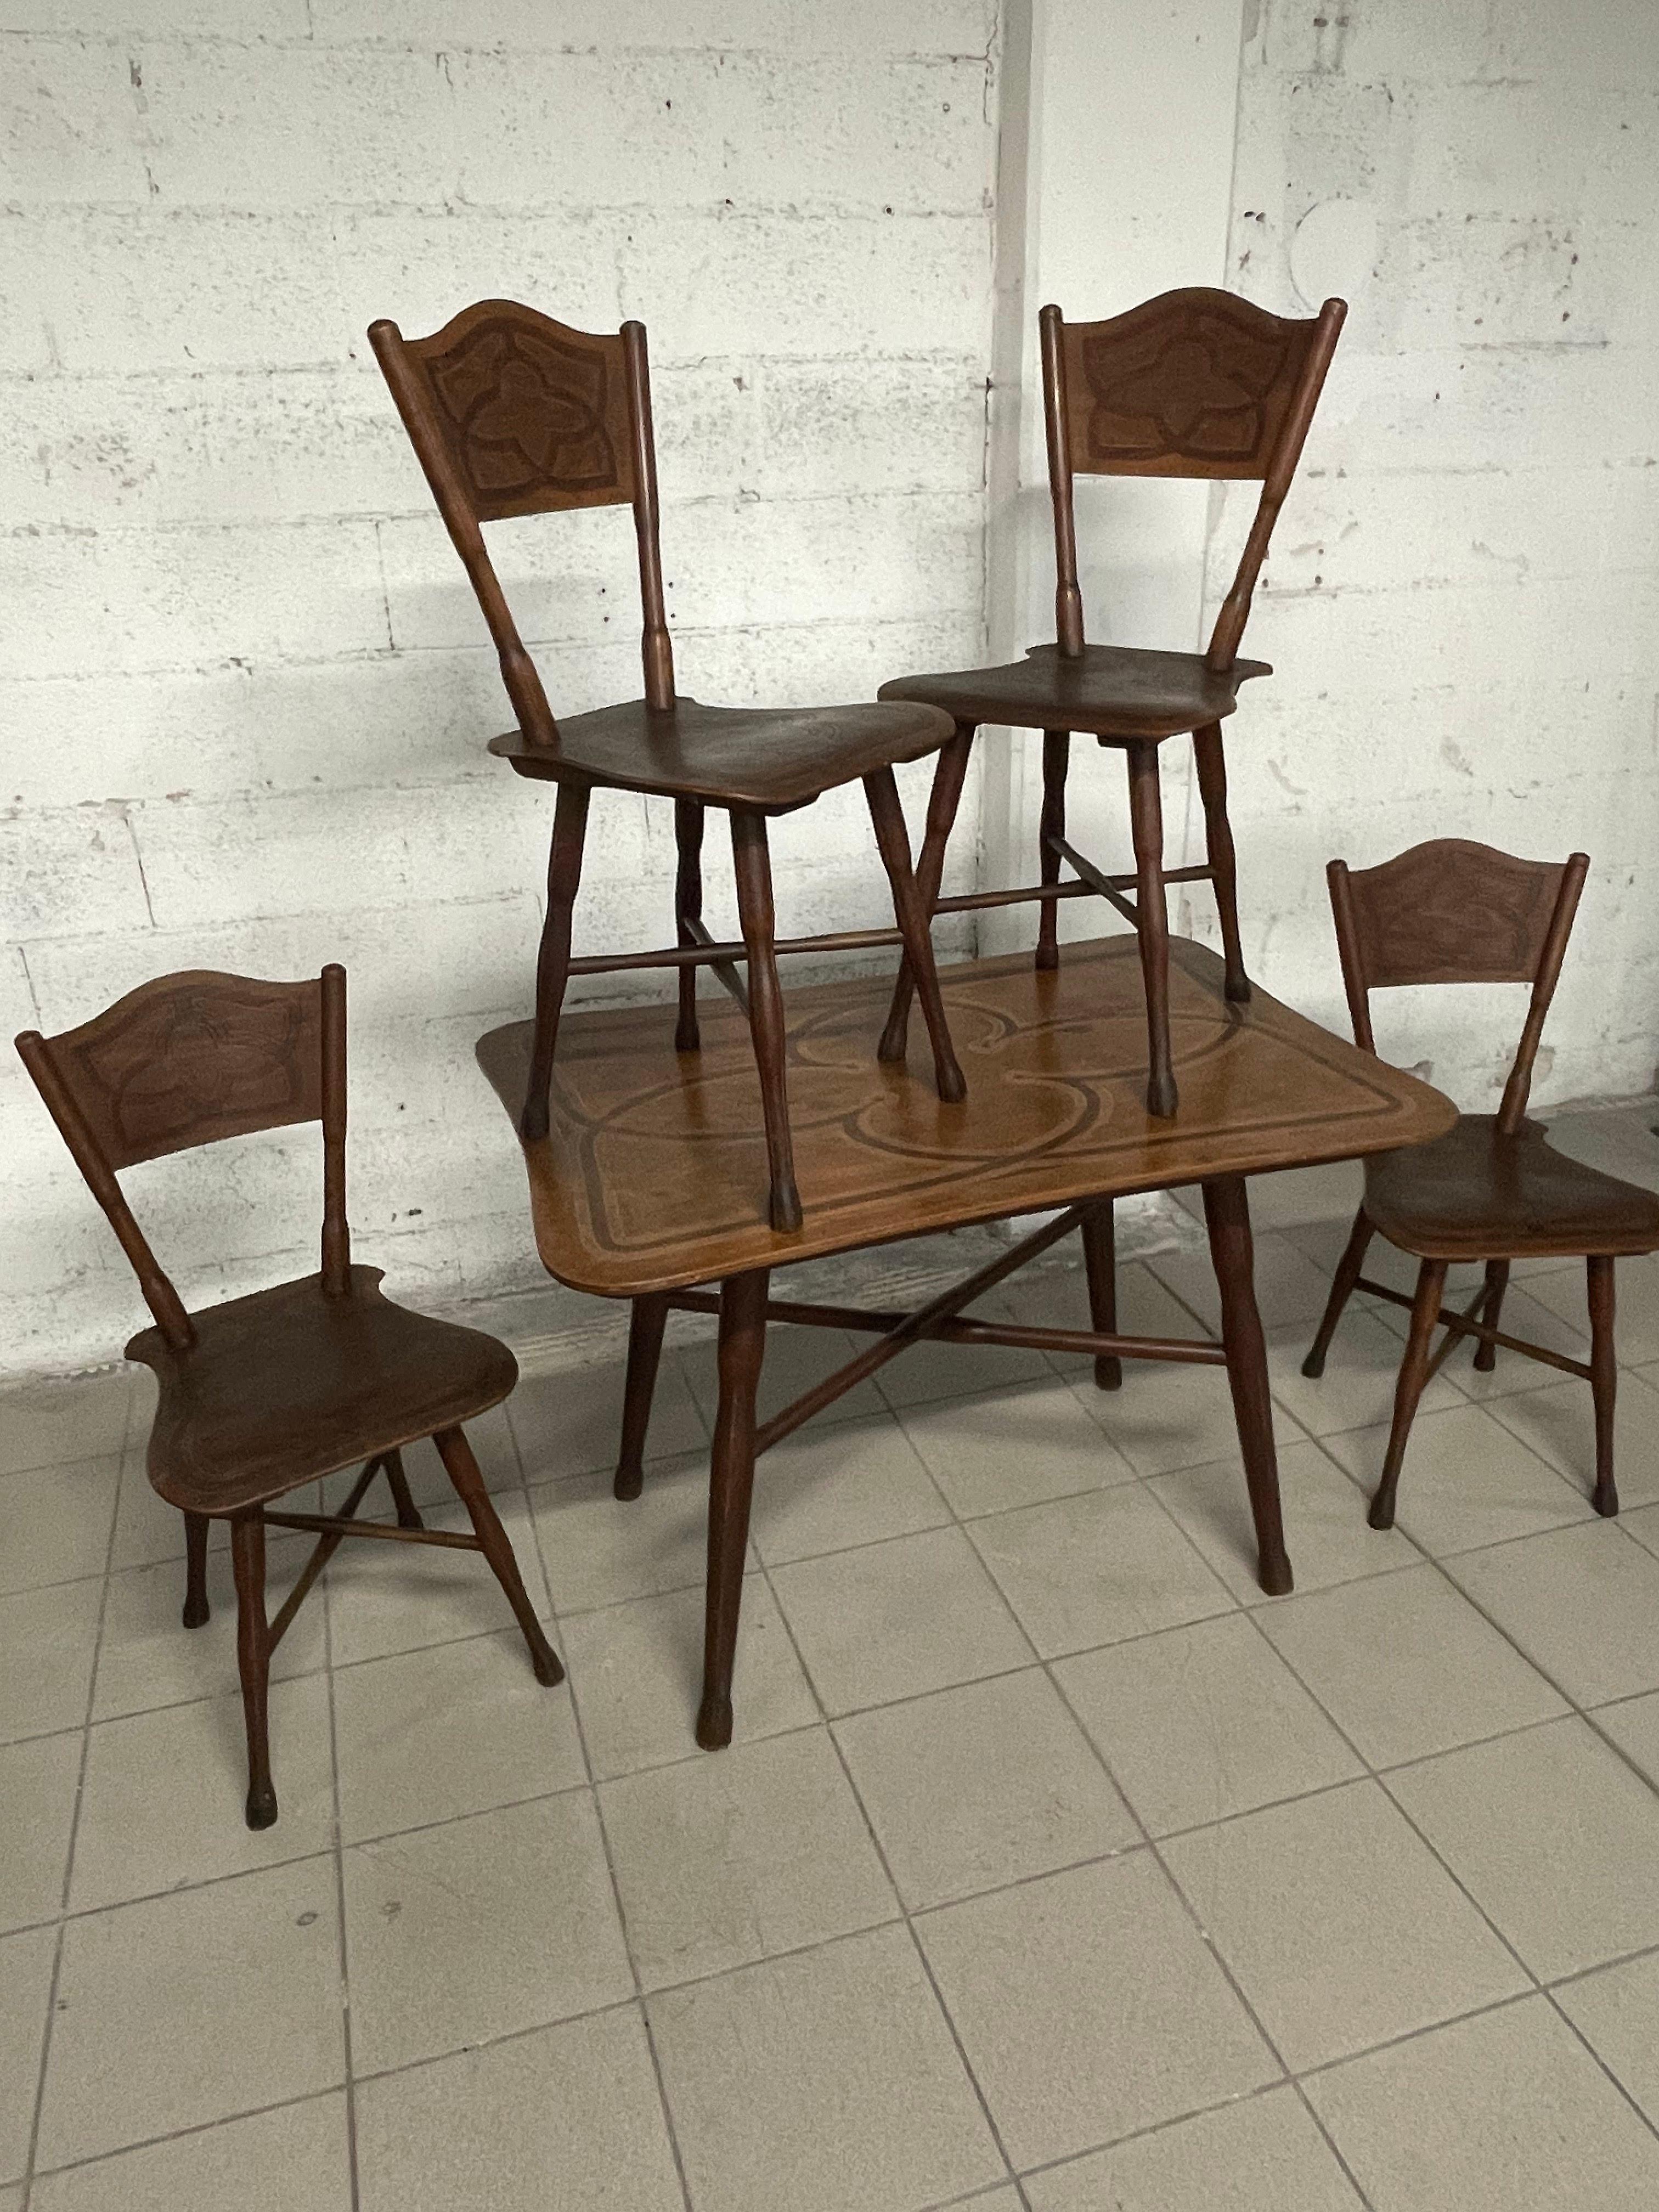 Set of 4 Thonet chairs and table, Austria, first half of 20th century For Sale 4